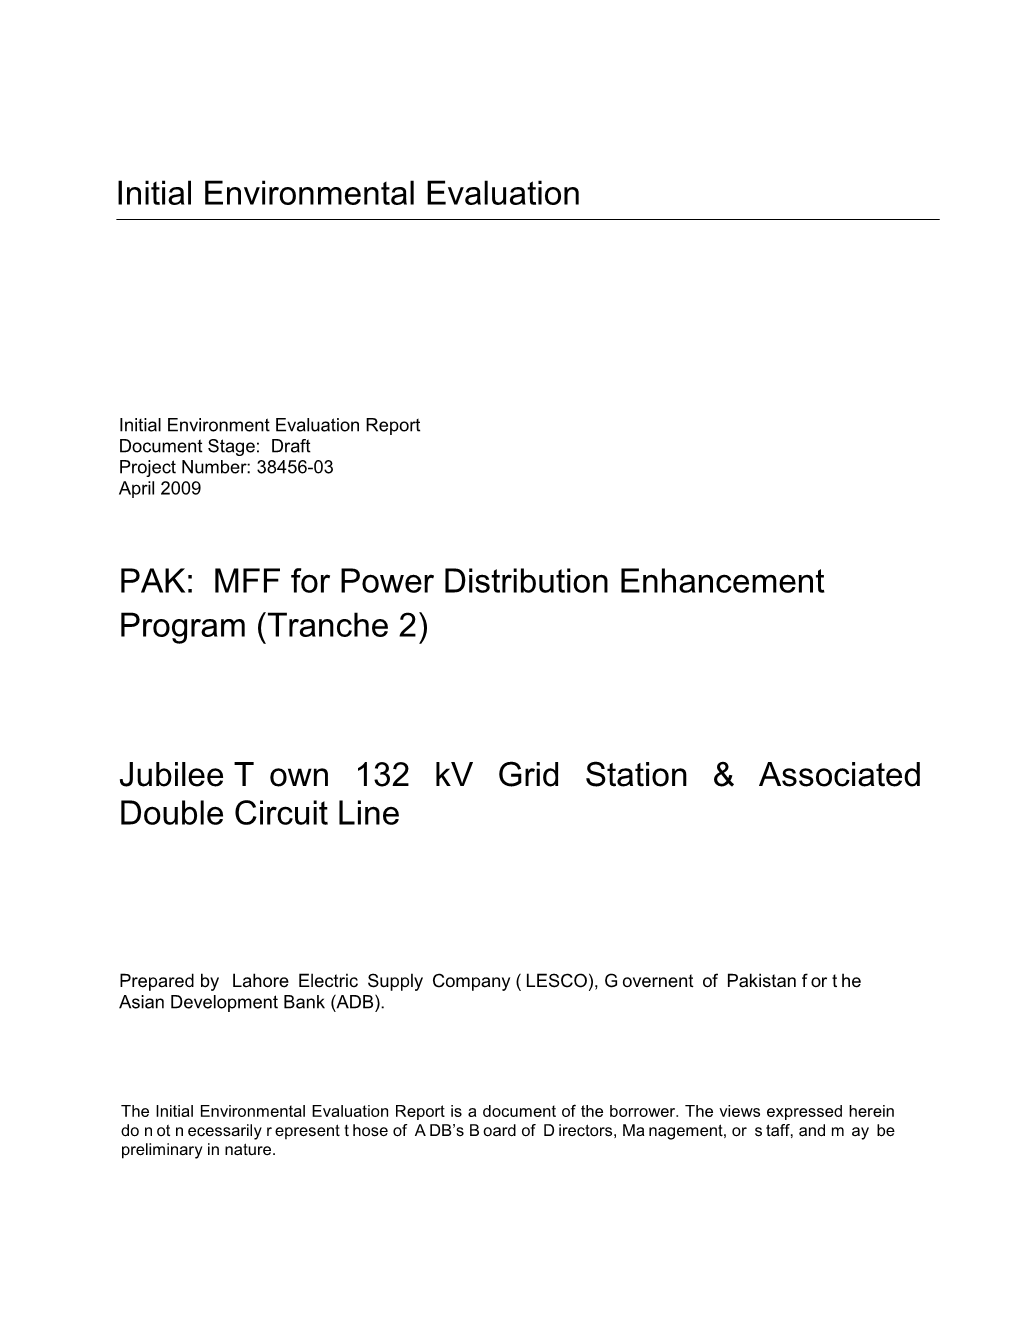 (Tranche 2): Jubilee Town 132 Kv Grid Station & Associated Double